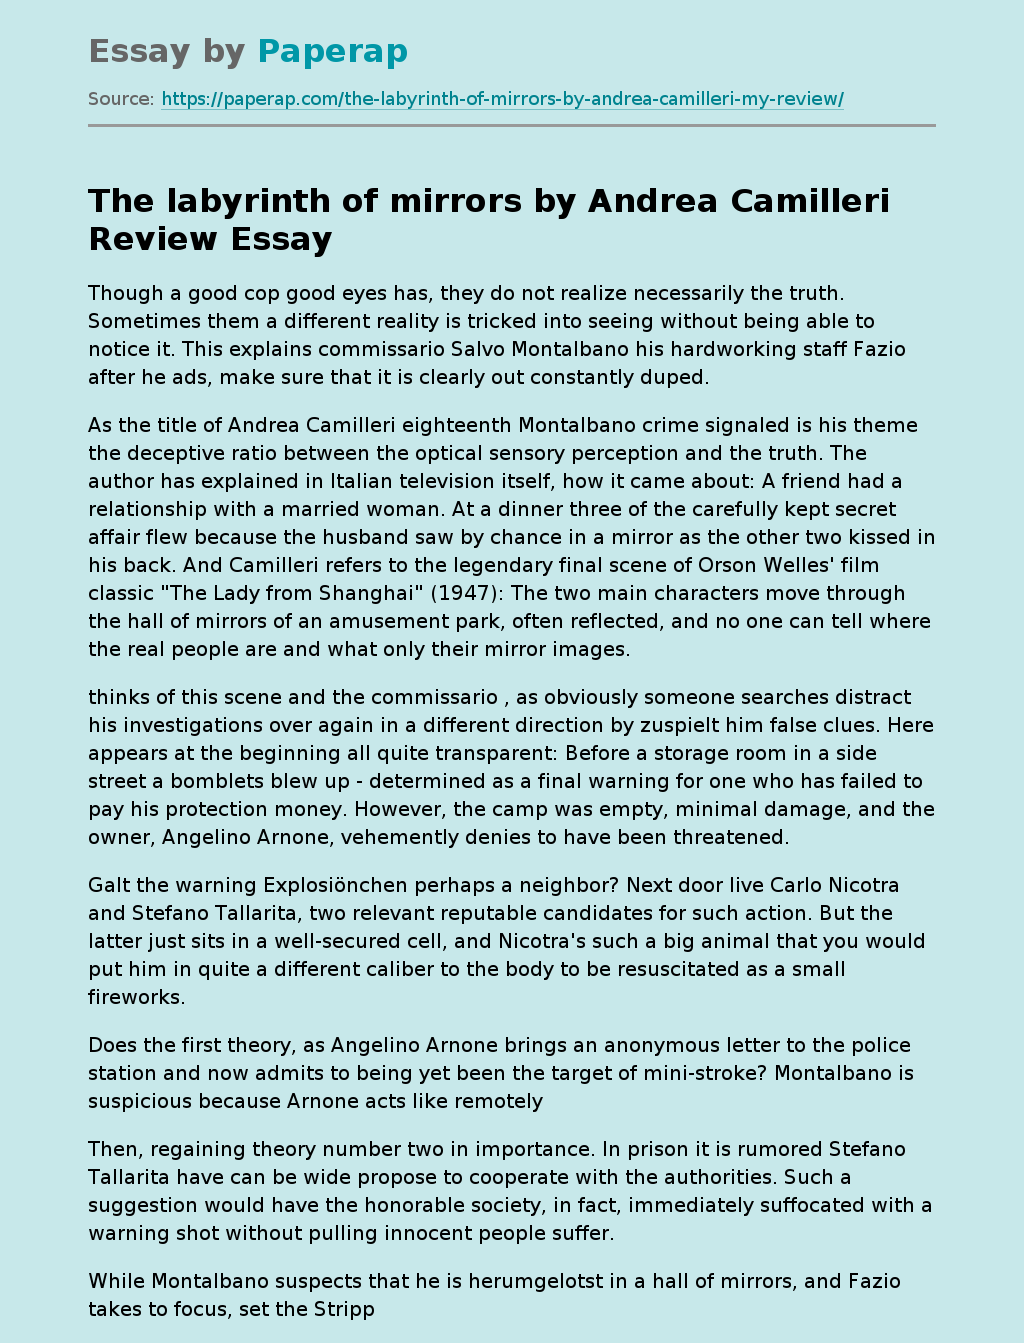 “The Labyrinth of Mirrors” by Andrea Camilleri